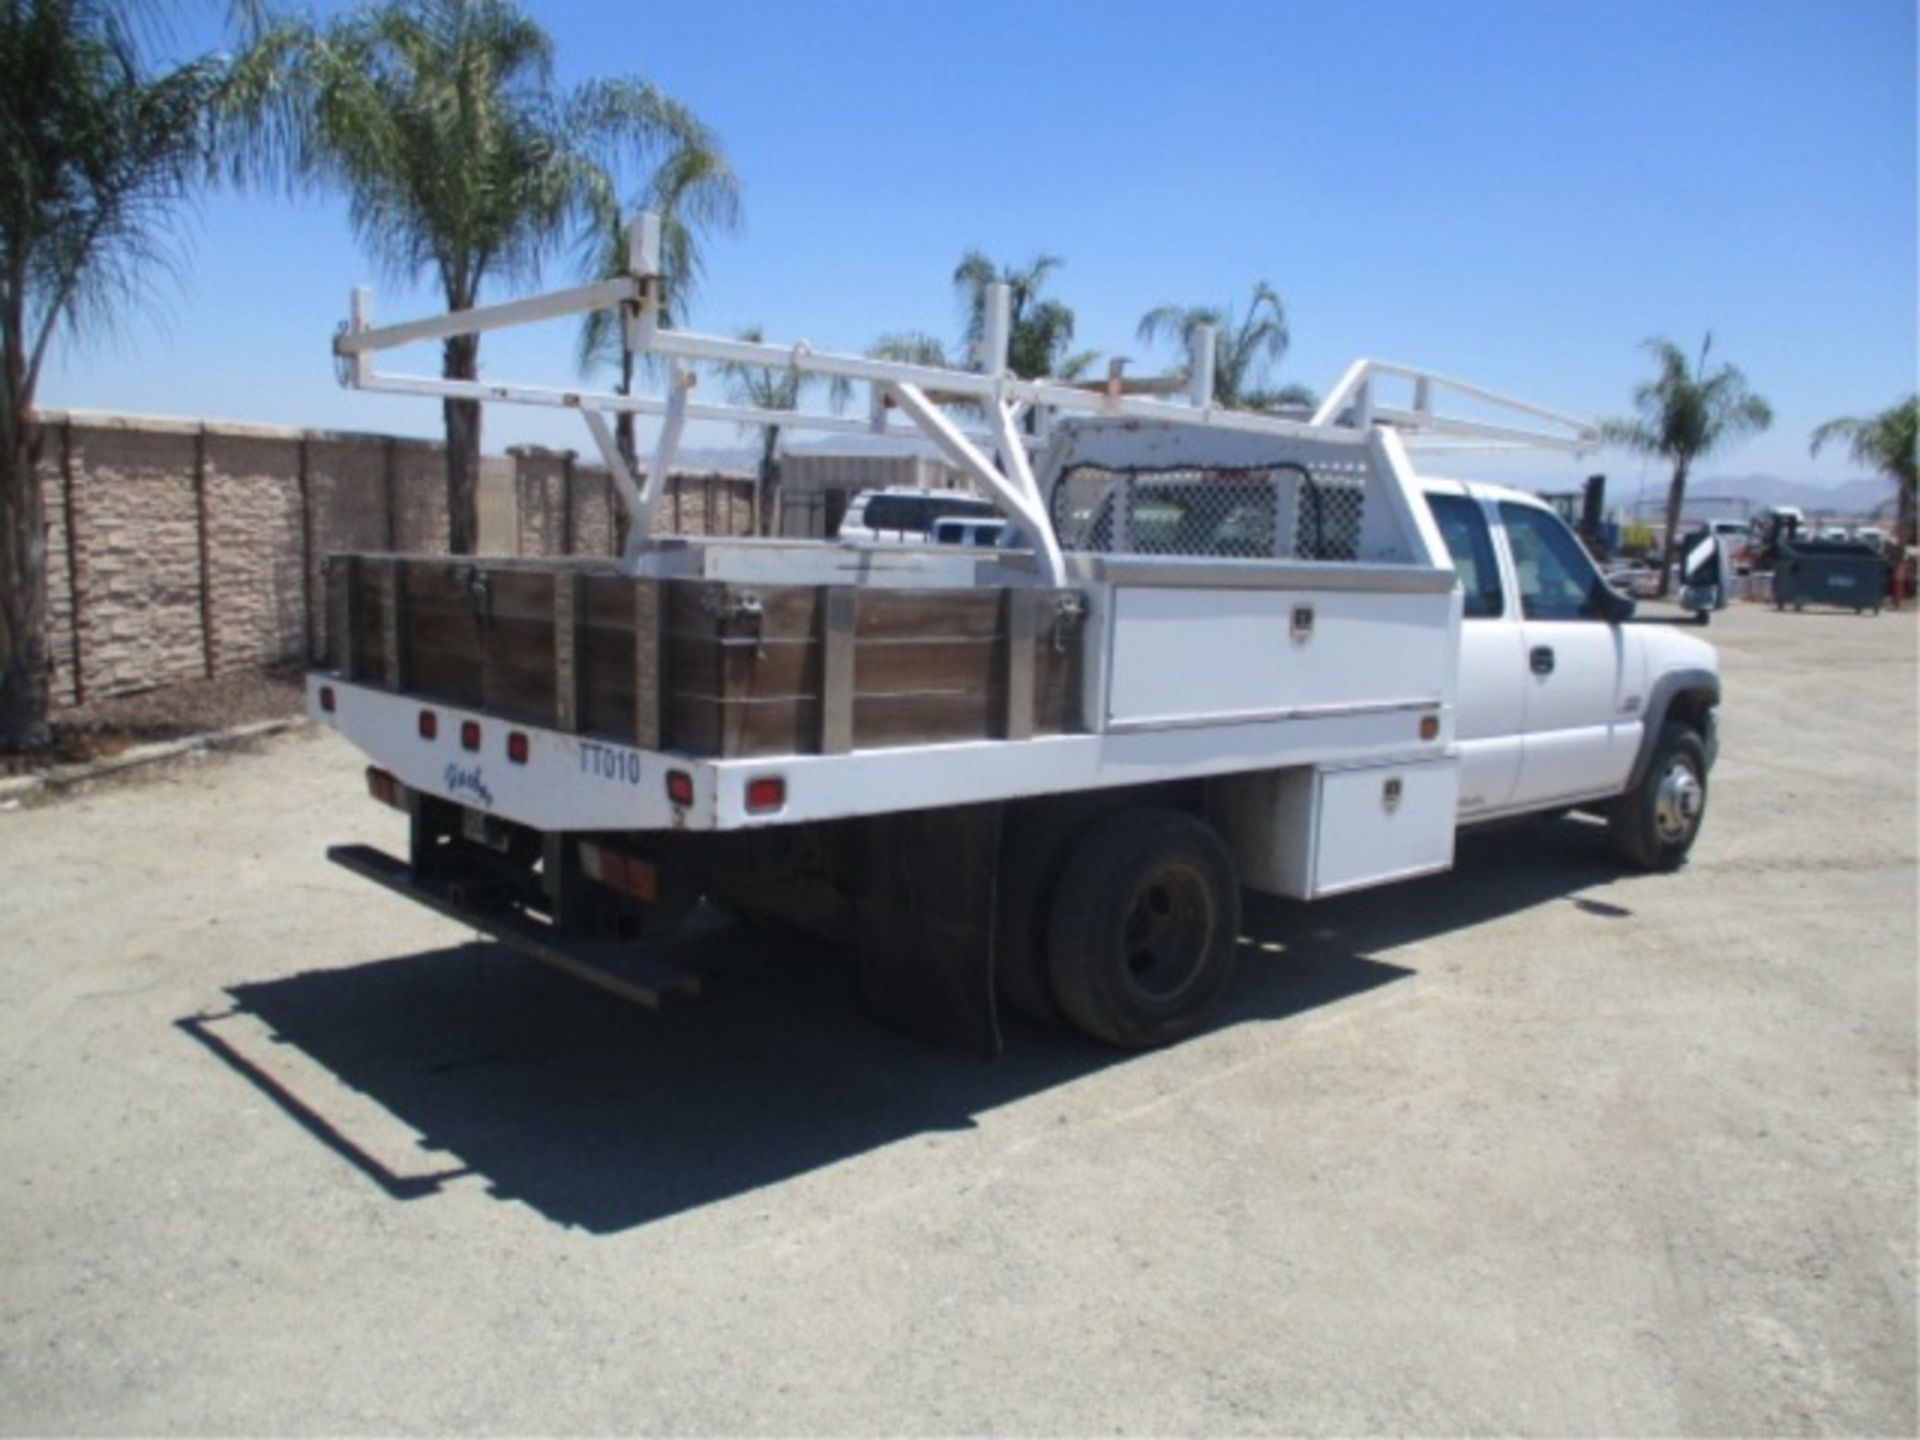 2006 Chevrolet 3500 Extended-Cab Utility Truck, 6.6L Turbo Diesel, Automatic, Tool Boxes, Lumber - Image 17 of 71